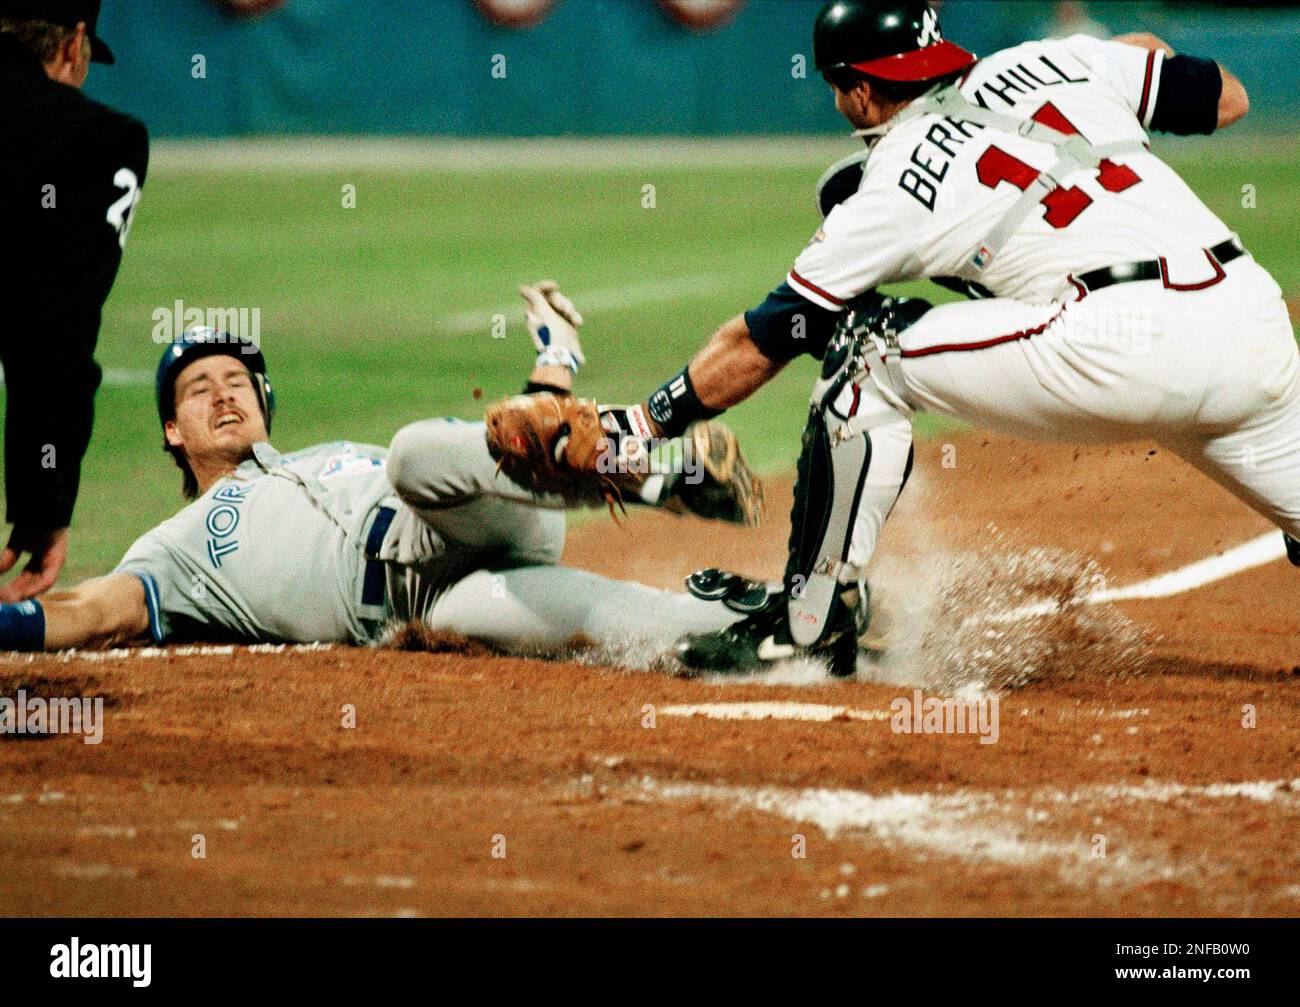 Toronto Blue Jay Pat Borders is tagged out at the plate in the fourth  inning of Game 6 of the World Series at Atlanta by Atlanta Braves Damon  Berryhill on a throw